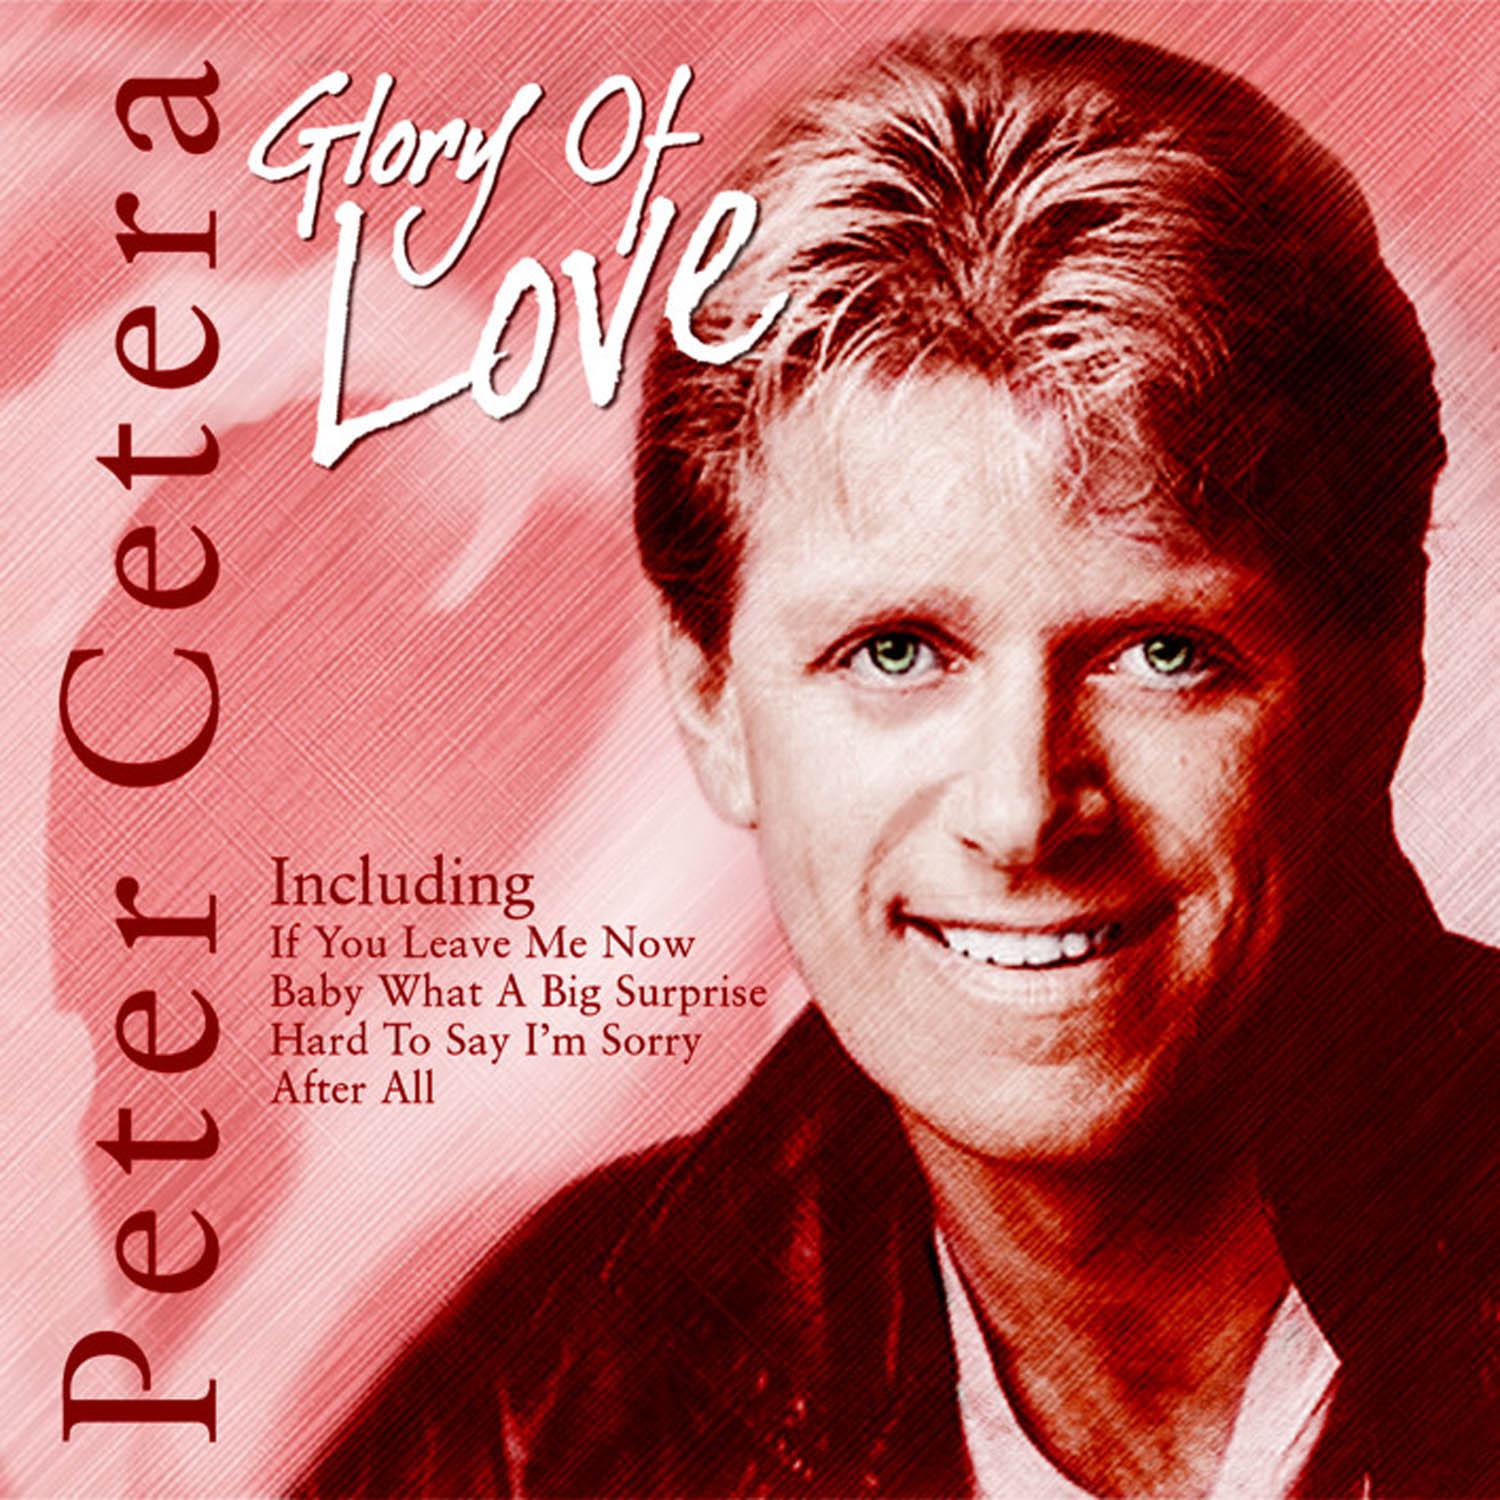 Peter Cetera - If You Leave Me Now